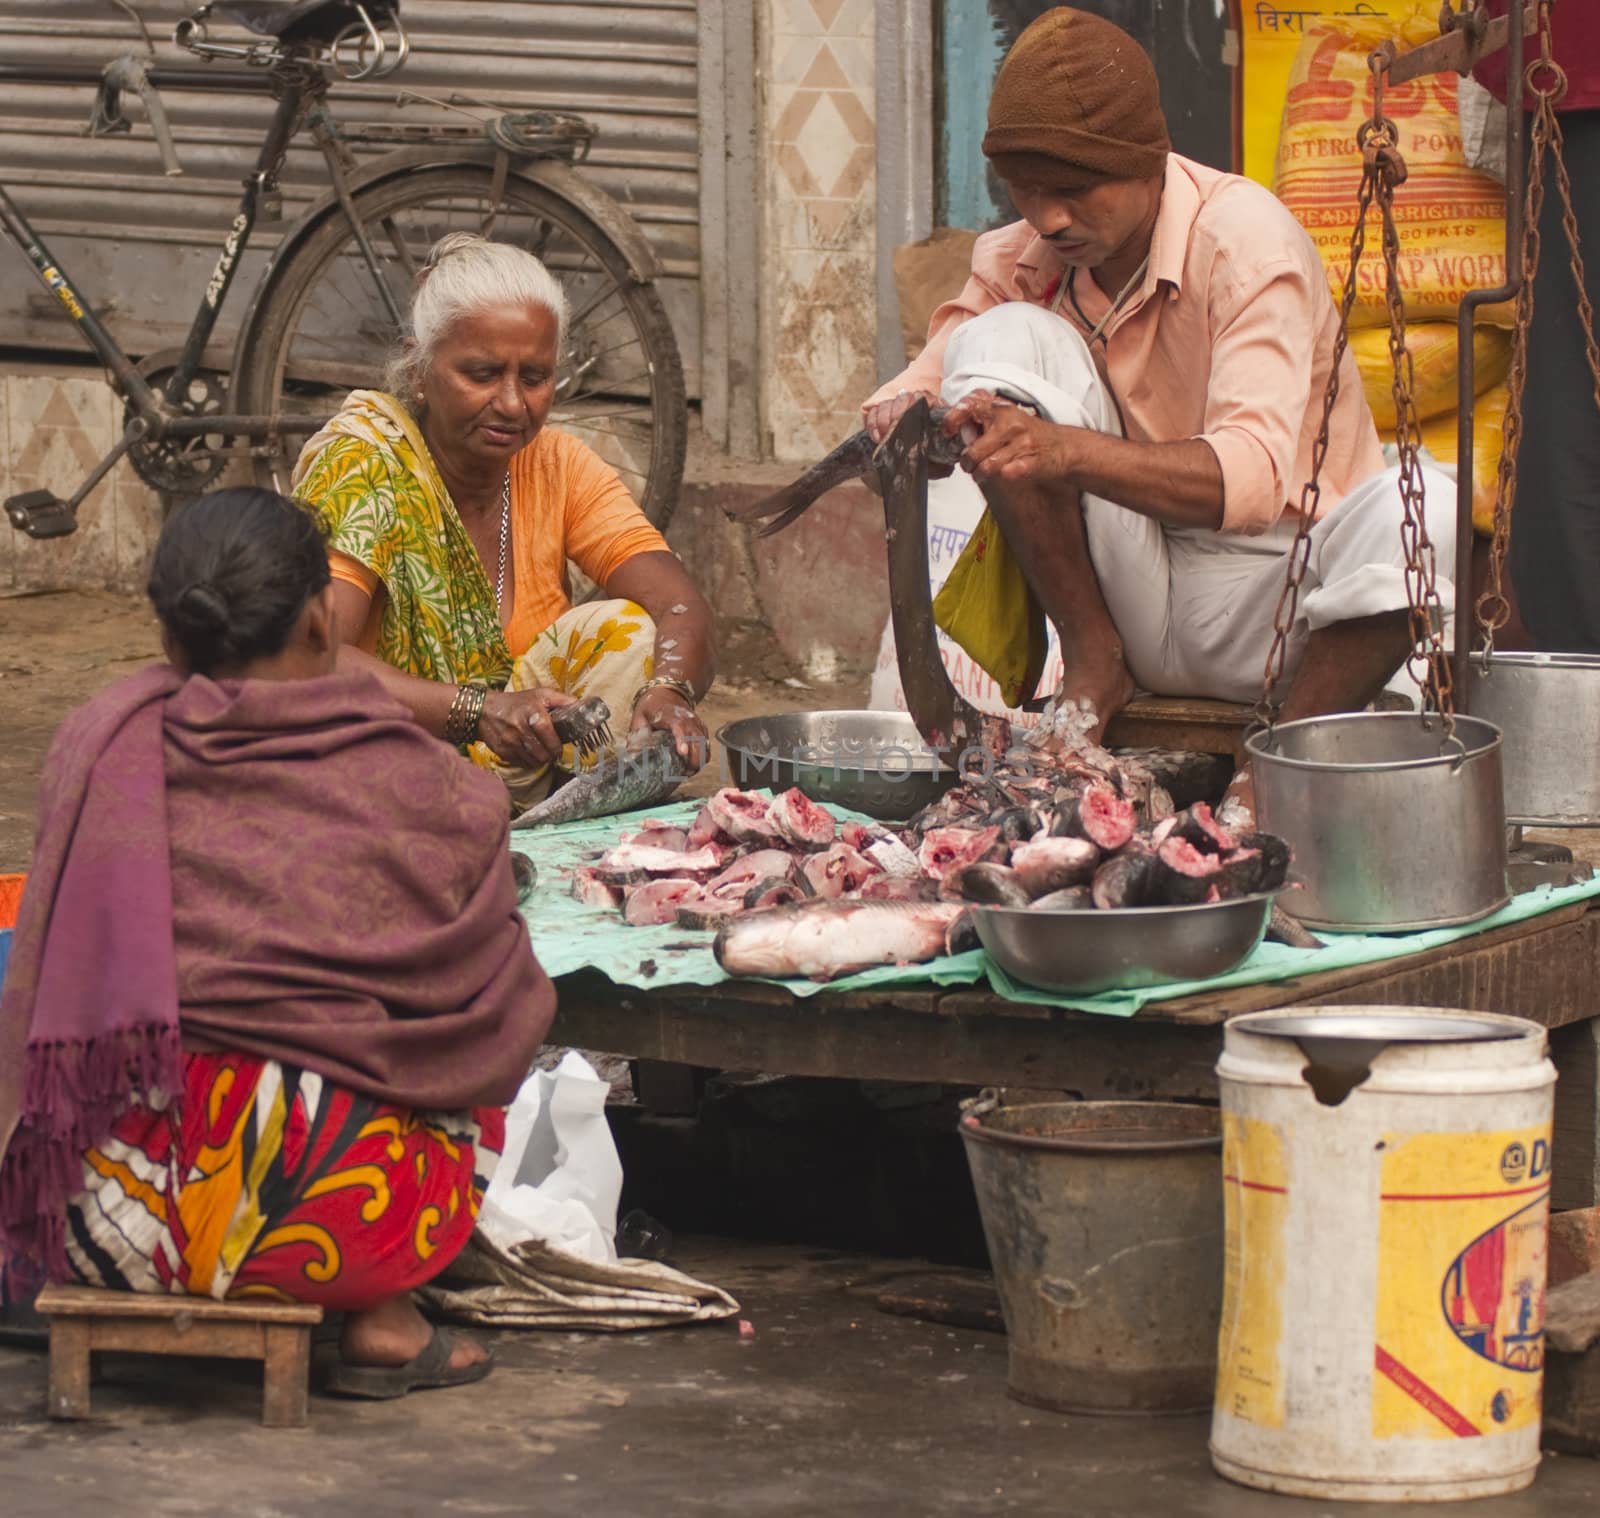 Selling fish from a stall in the street in Calcutta, West Bengal, India.